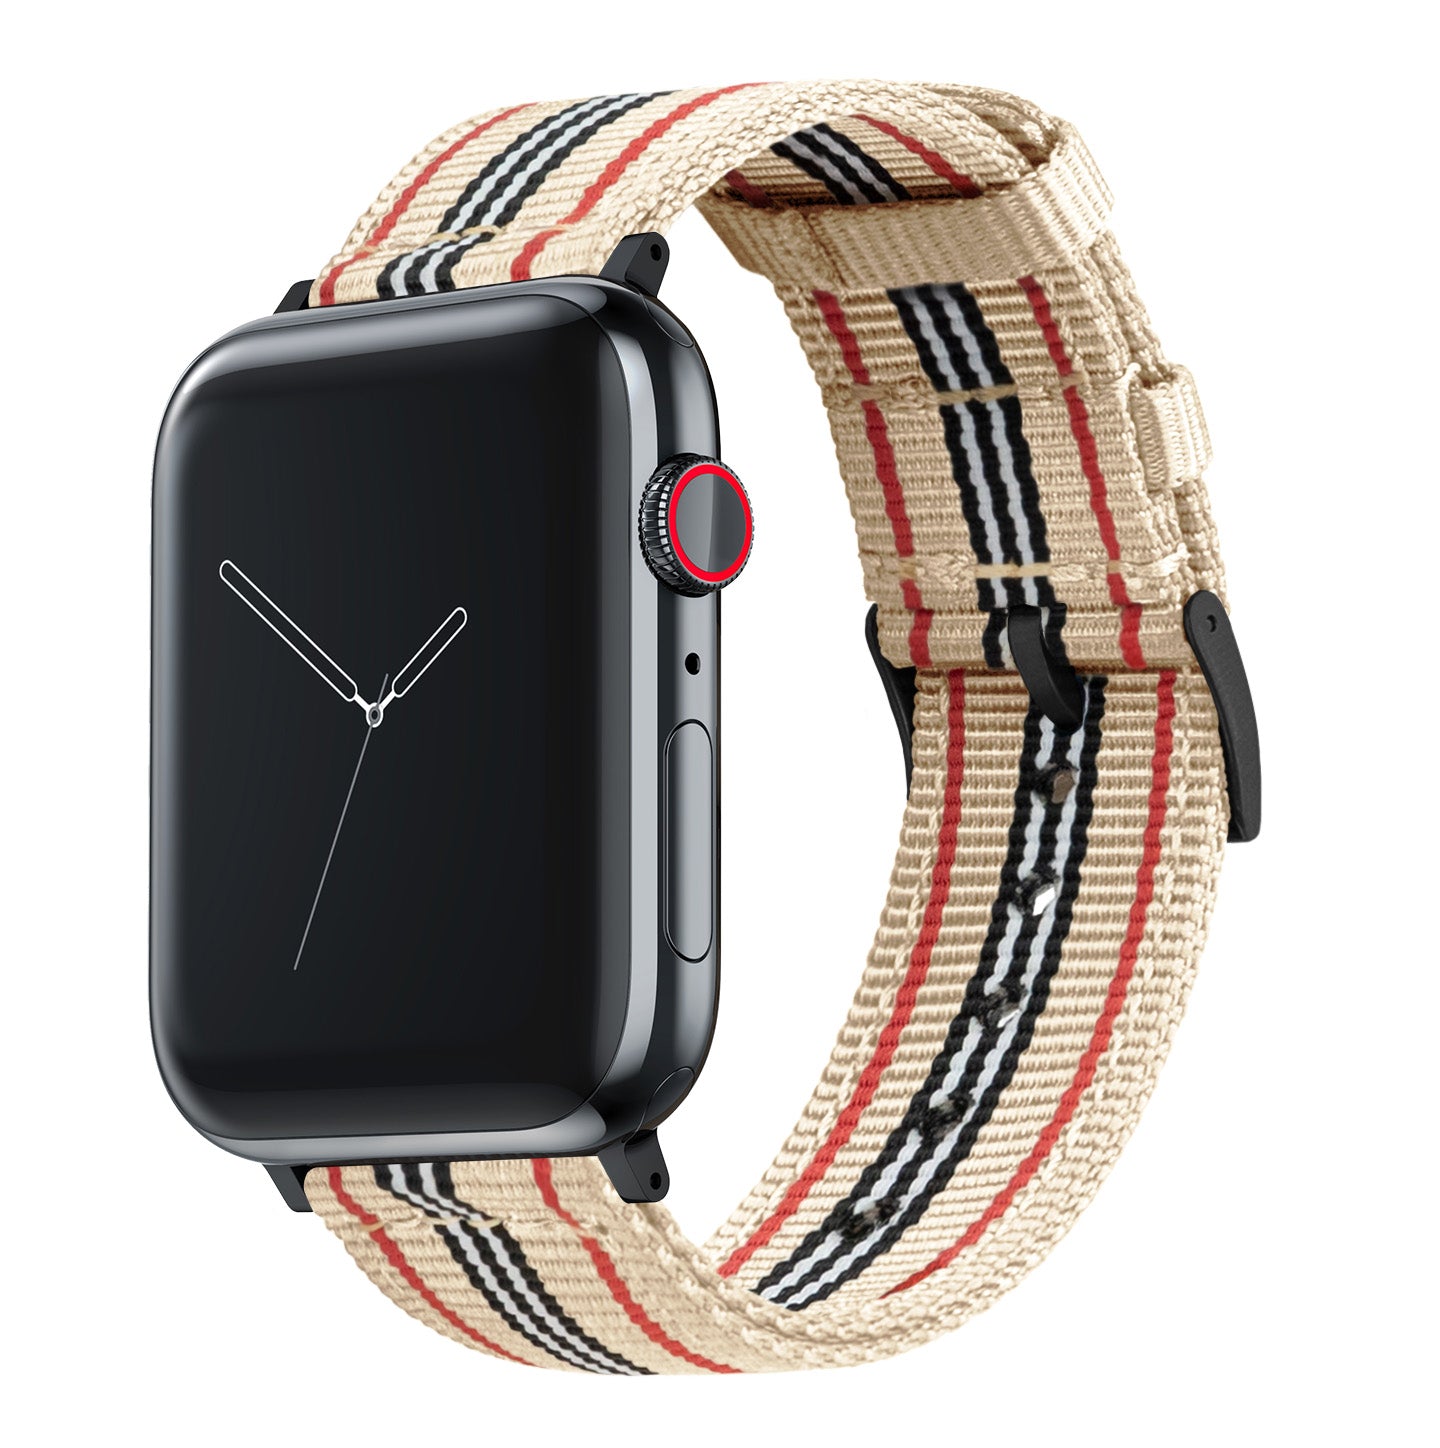 Apple Watch | Two-piece NATO Style | Retro - Barton Watch Bands